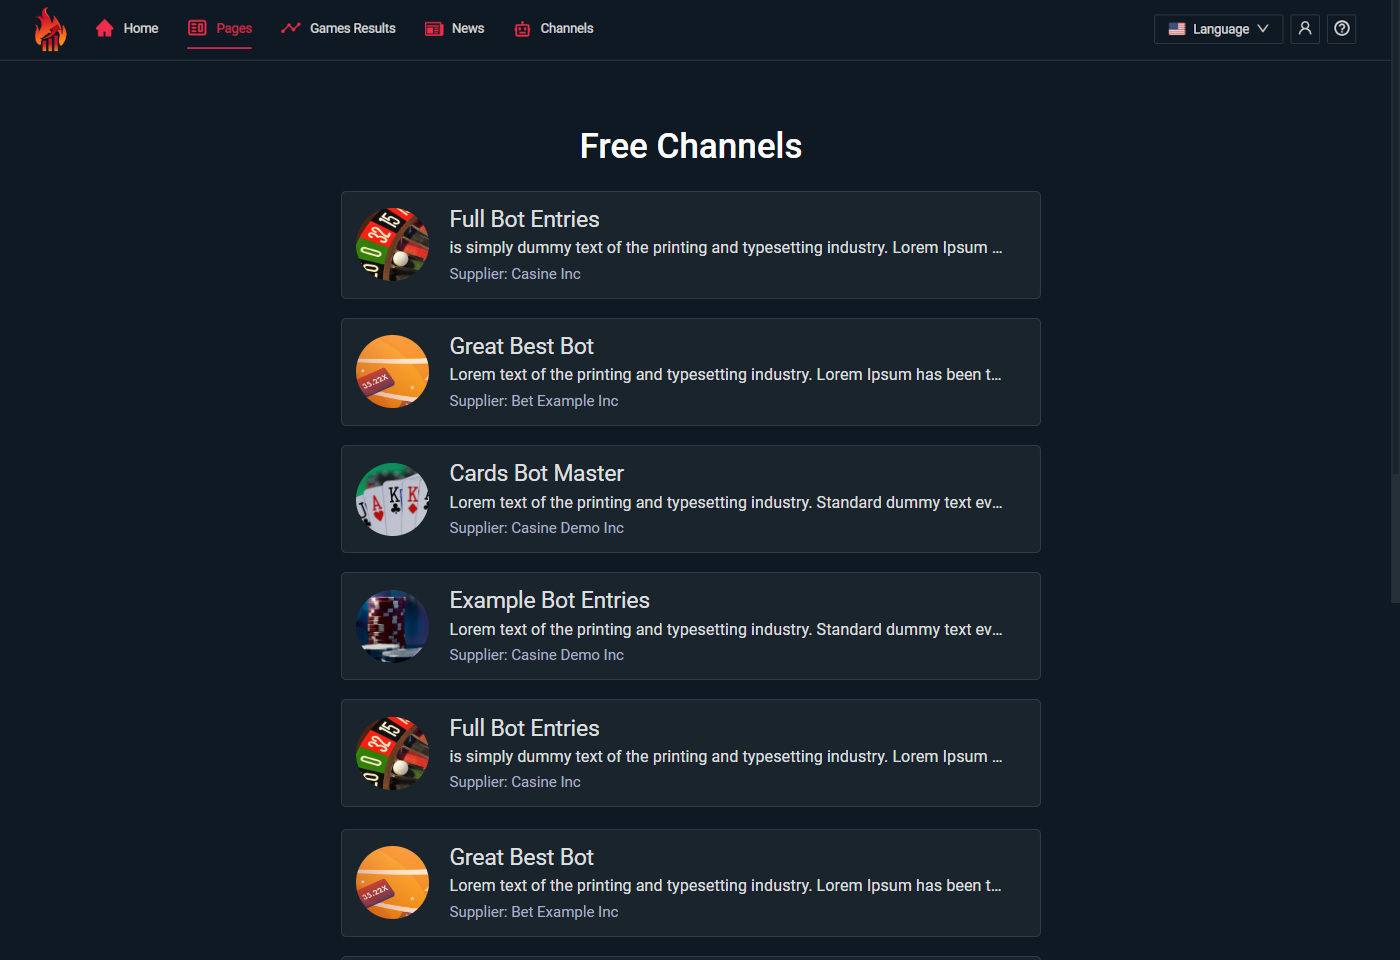 Channels Page Image